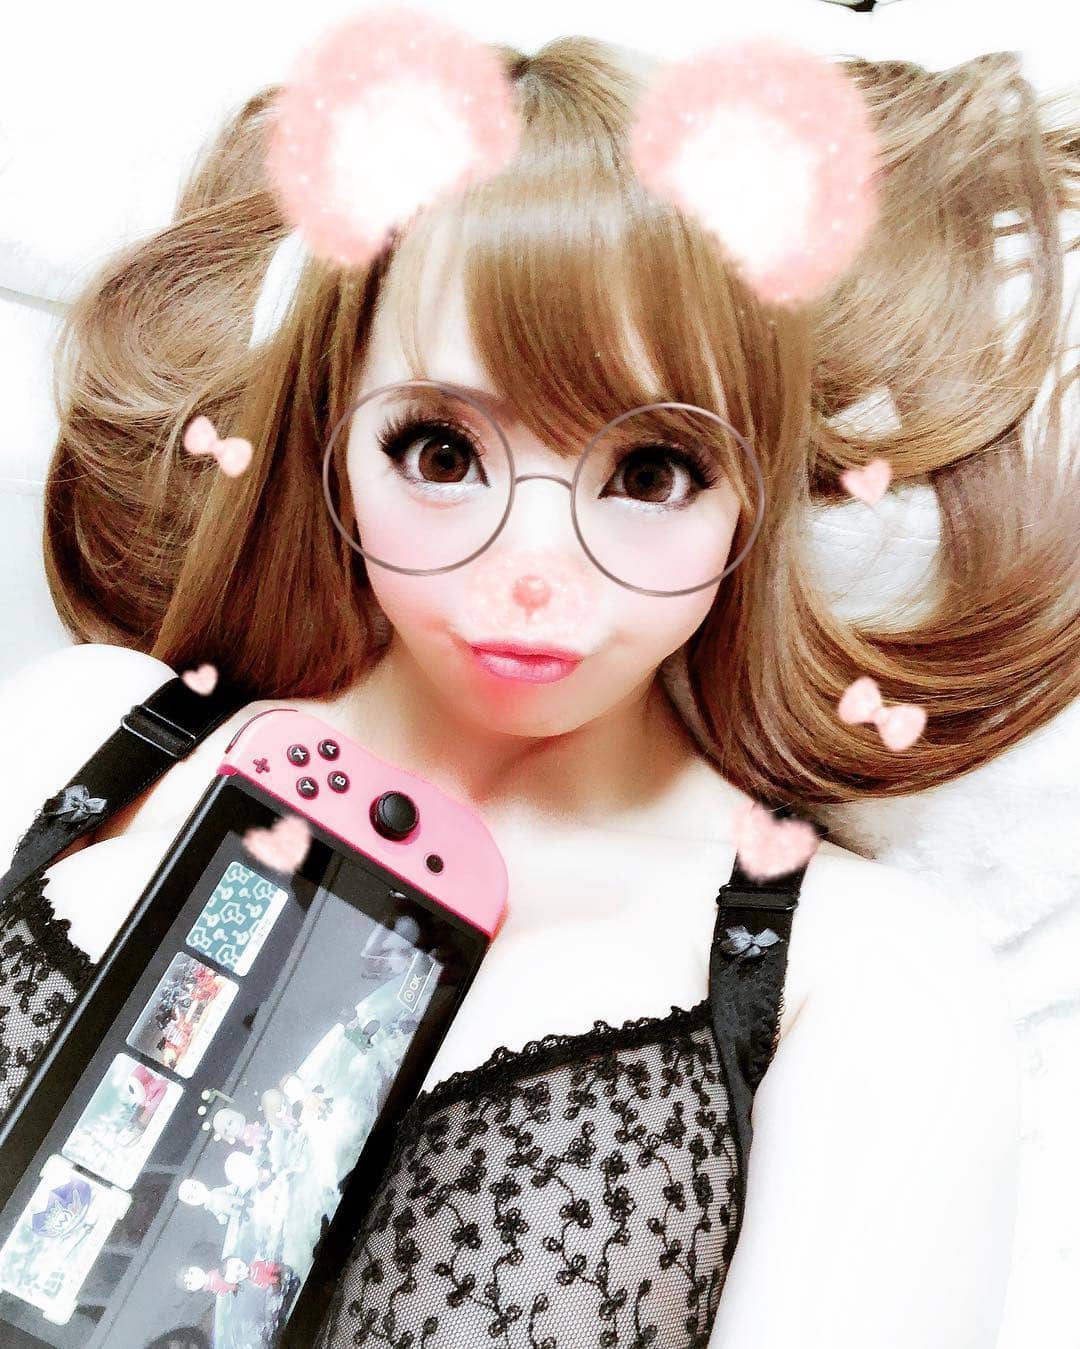 Hitomi Tanaka playing on the Switch